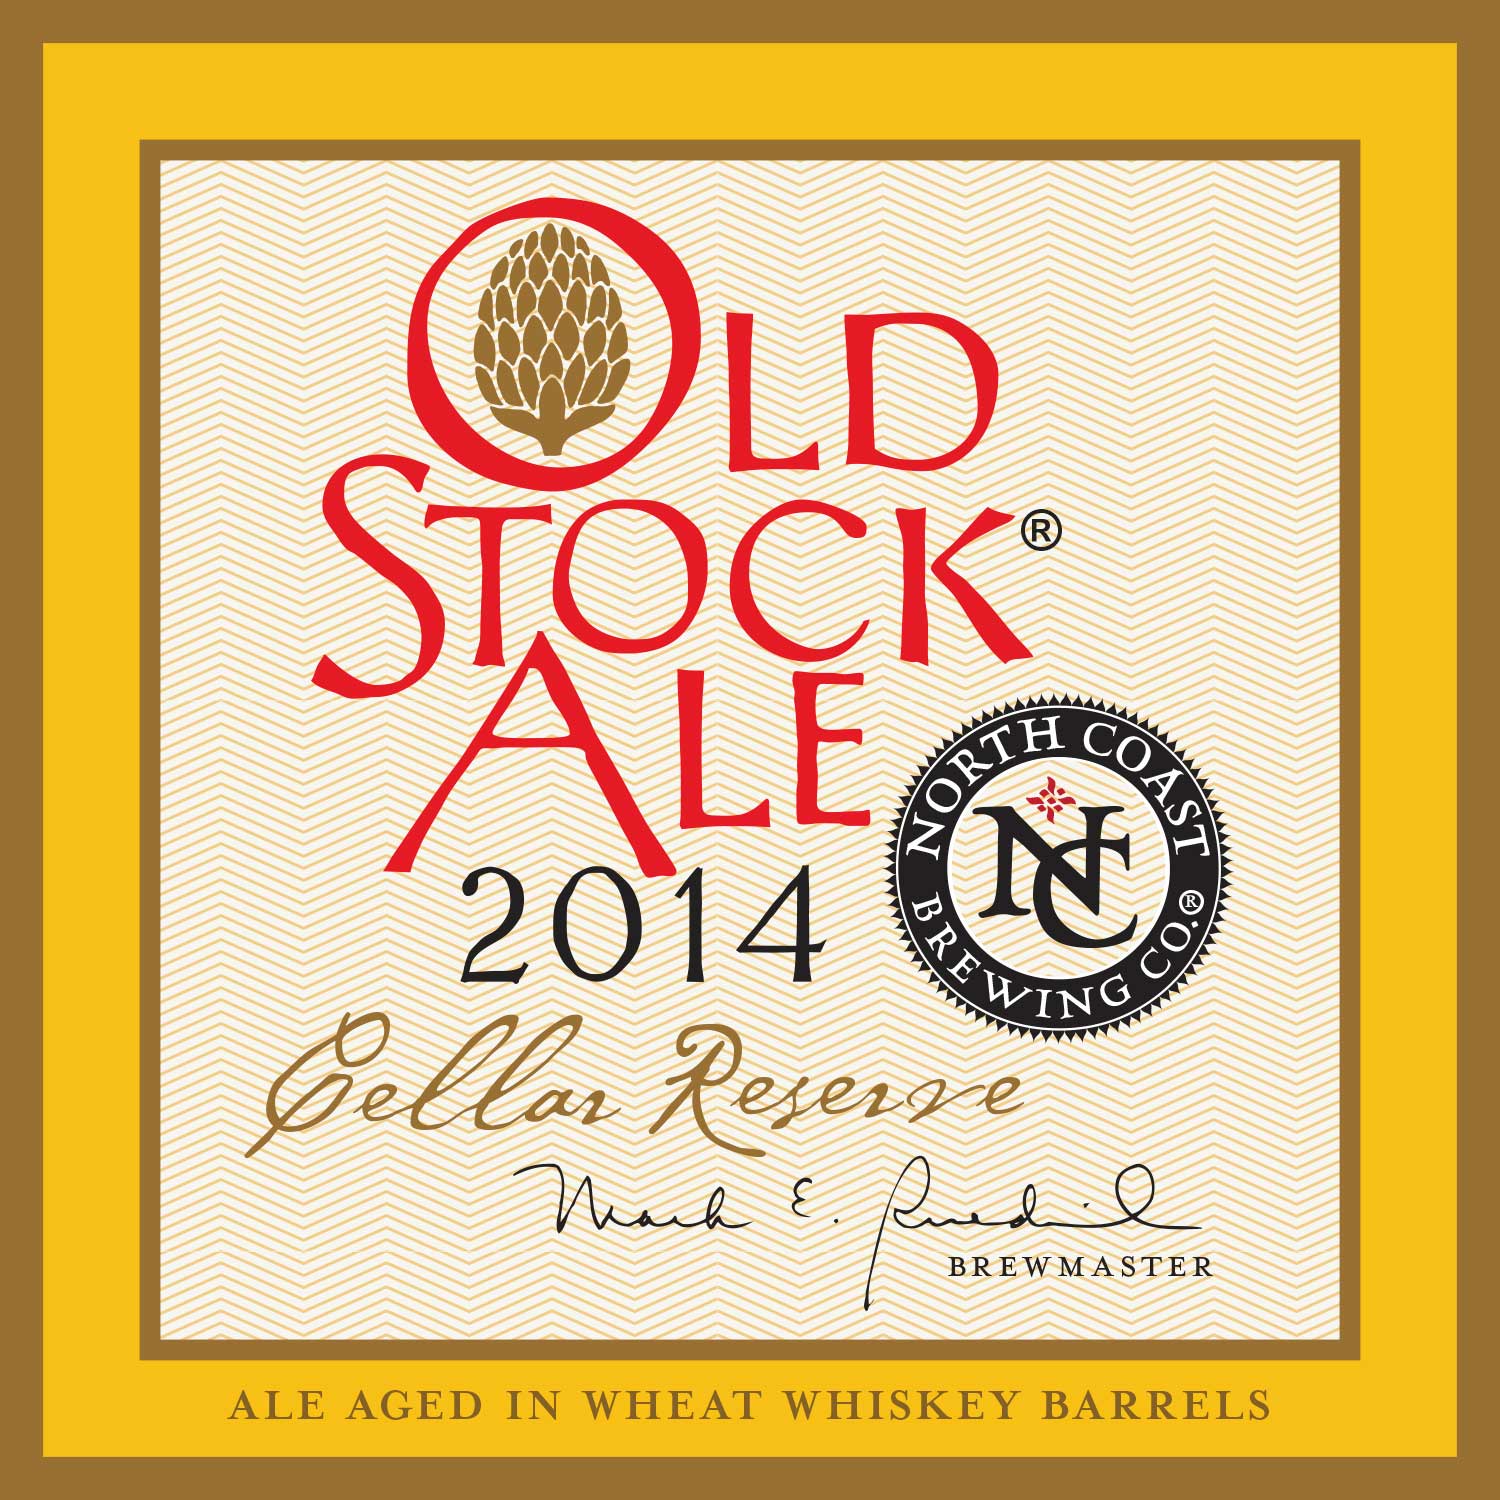 Old Stock Cellar Reserve 2014 Wheat